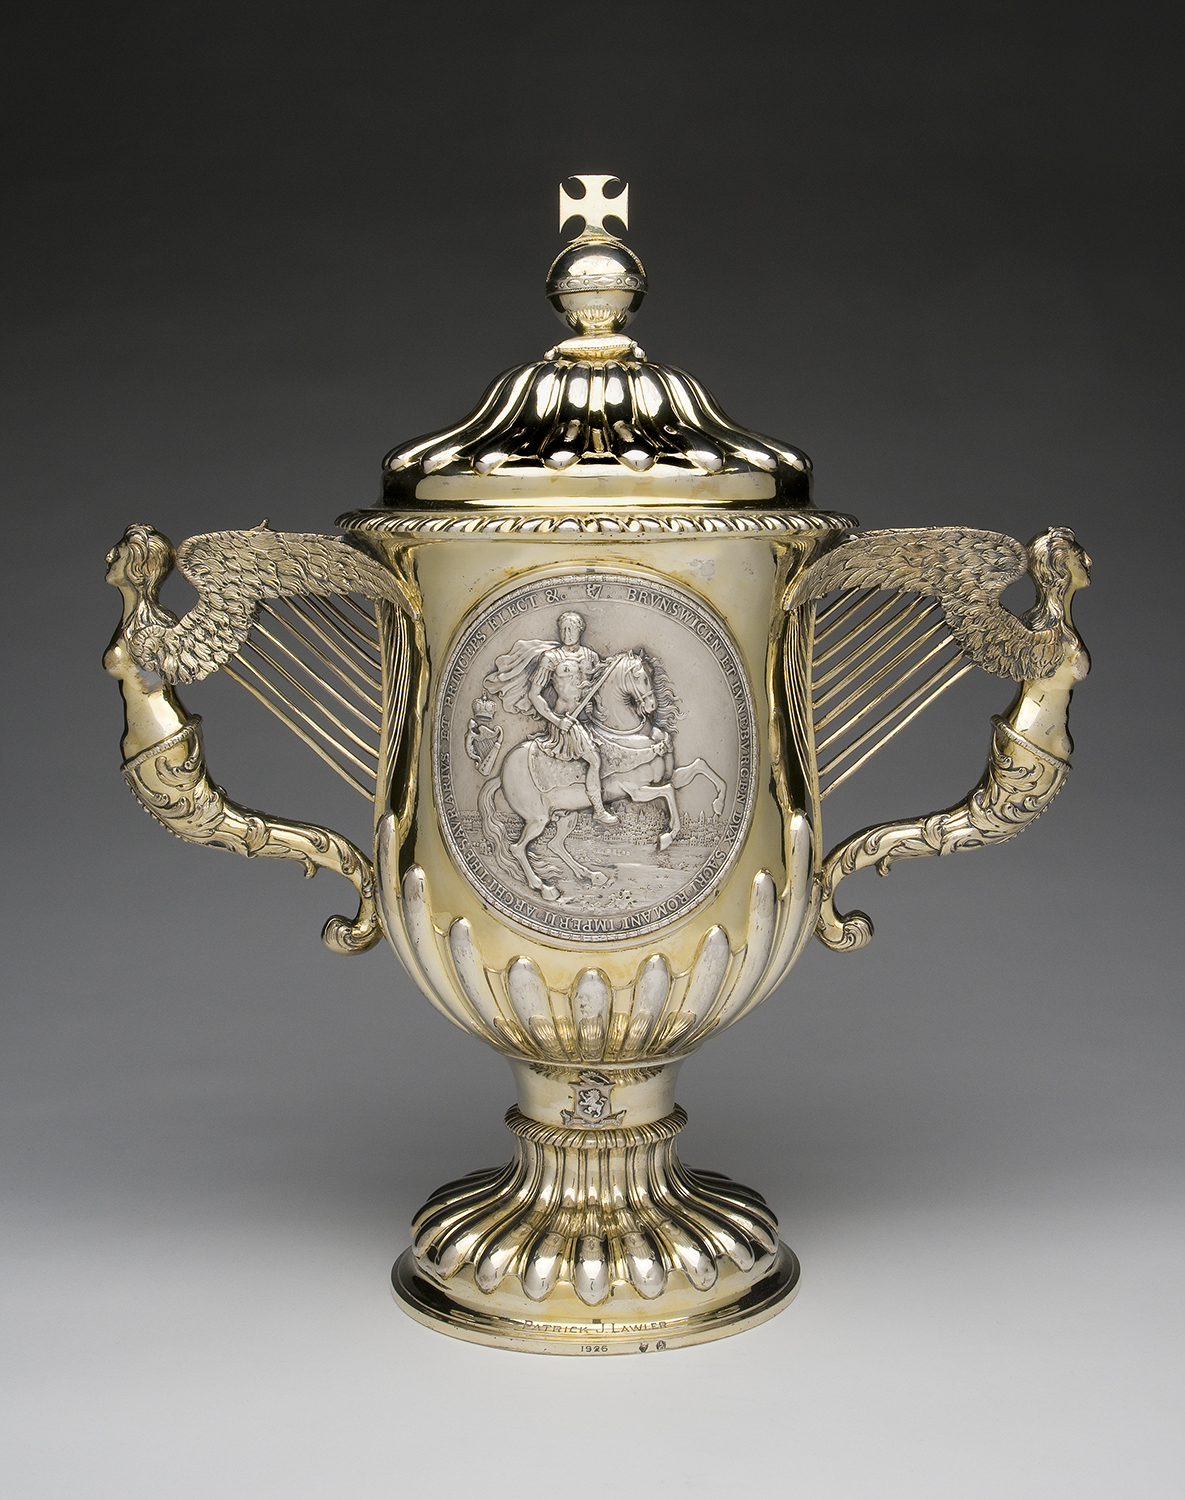 Two Handled Samuel Walker. Silver Cup and Cover, c. 1761 – 1766.  On loan from Philadelphia Museum of Art. Samuel Walker was one of a famous family of  silversmiths from Dublin. The exhibition also  features an extensive collection of Irish silver objects from the San  Antonio Museum of  Art, Texas.